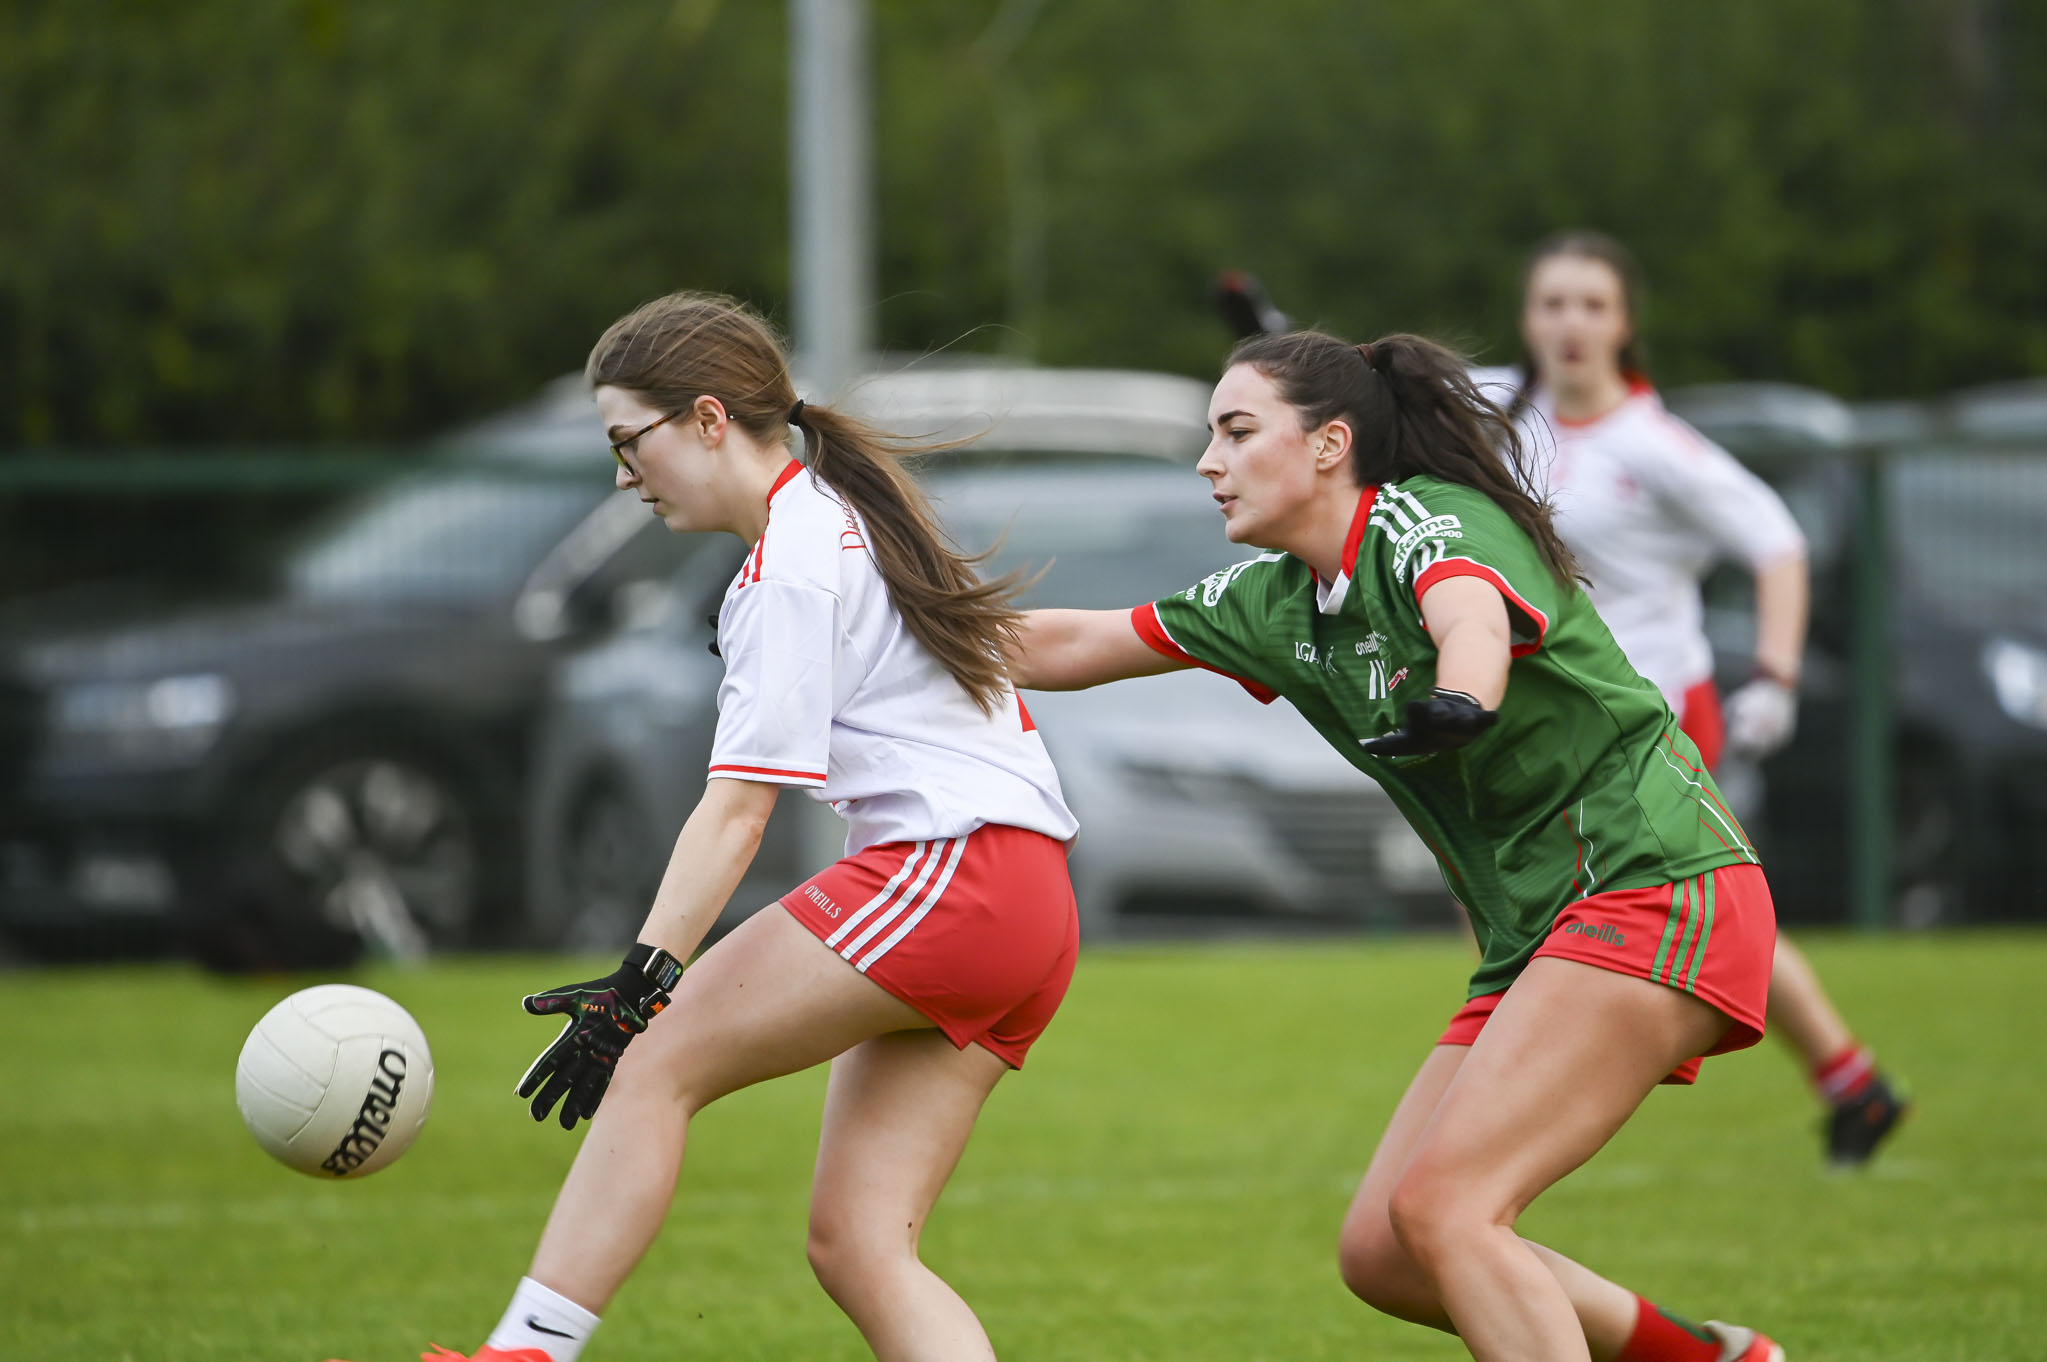 All to play for in final weekend of Ladies Leagues